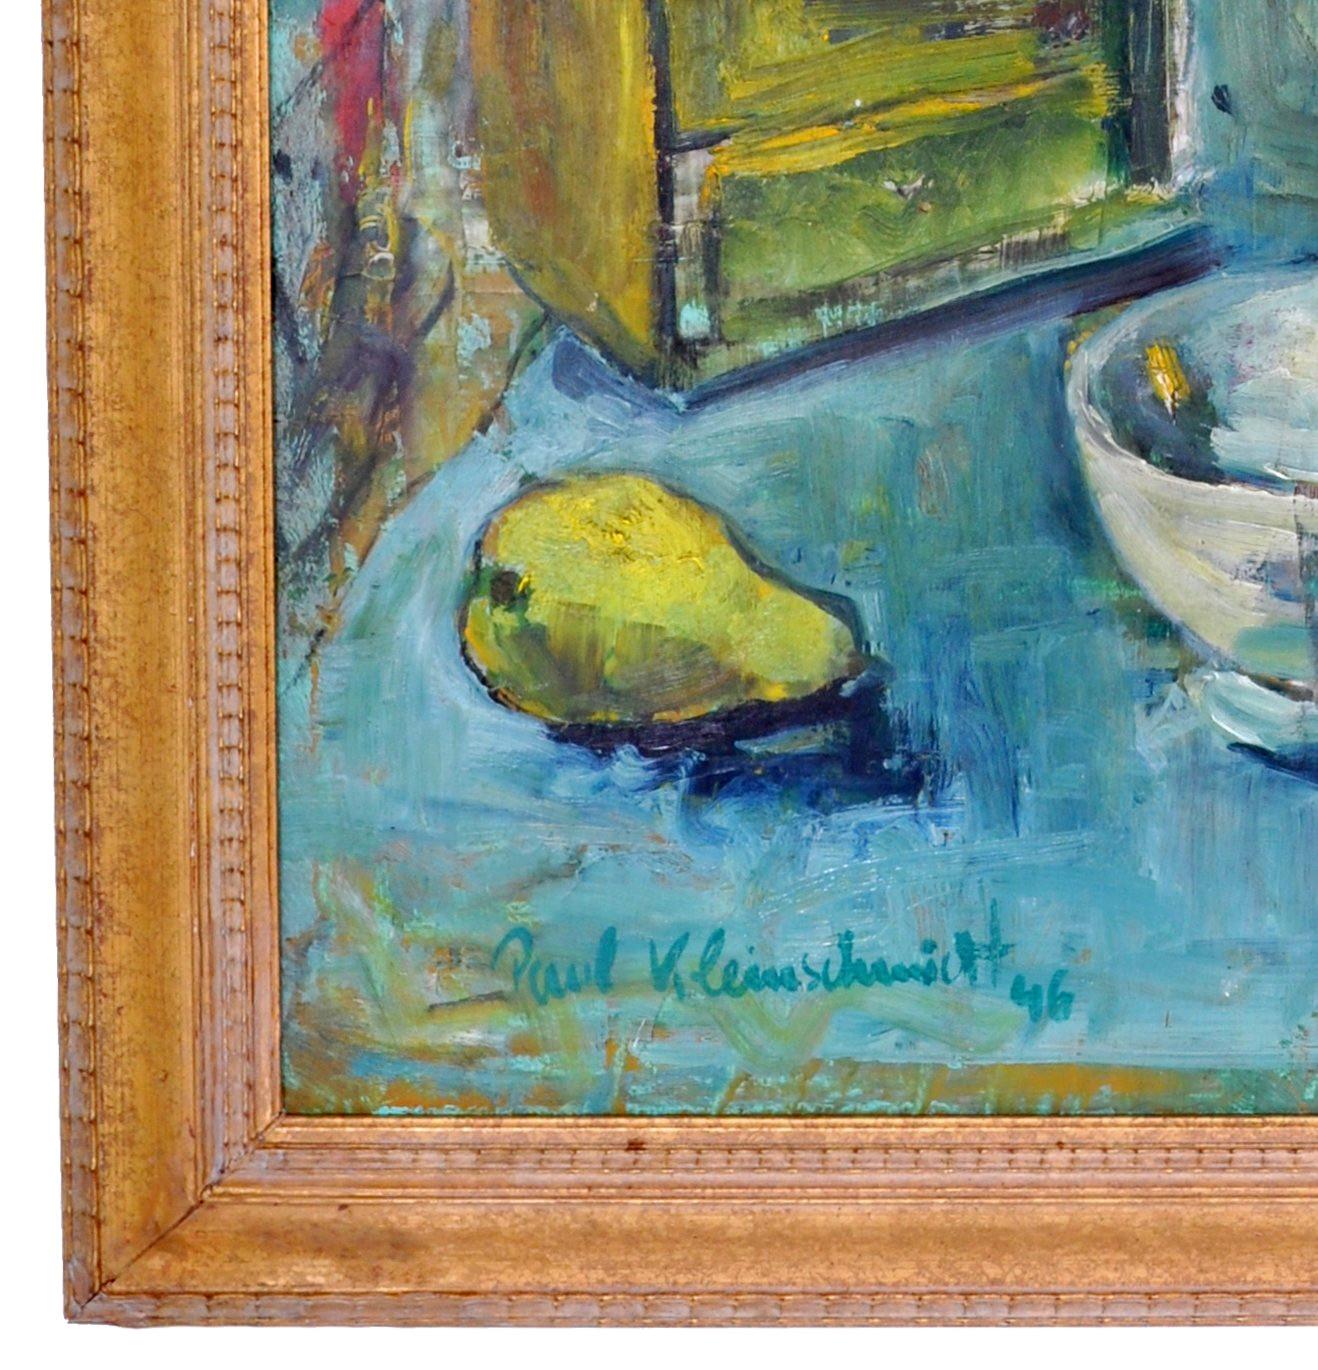 German Expressionist Oil on Board Still Life Painting by Paul Kleinschmidt 1946 8